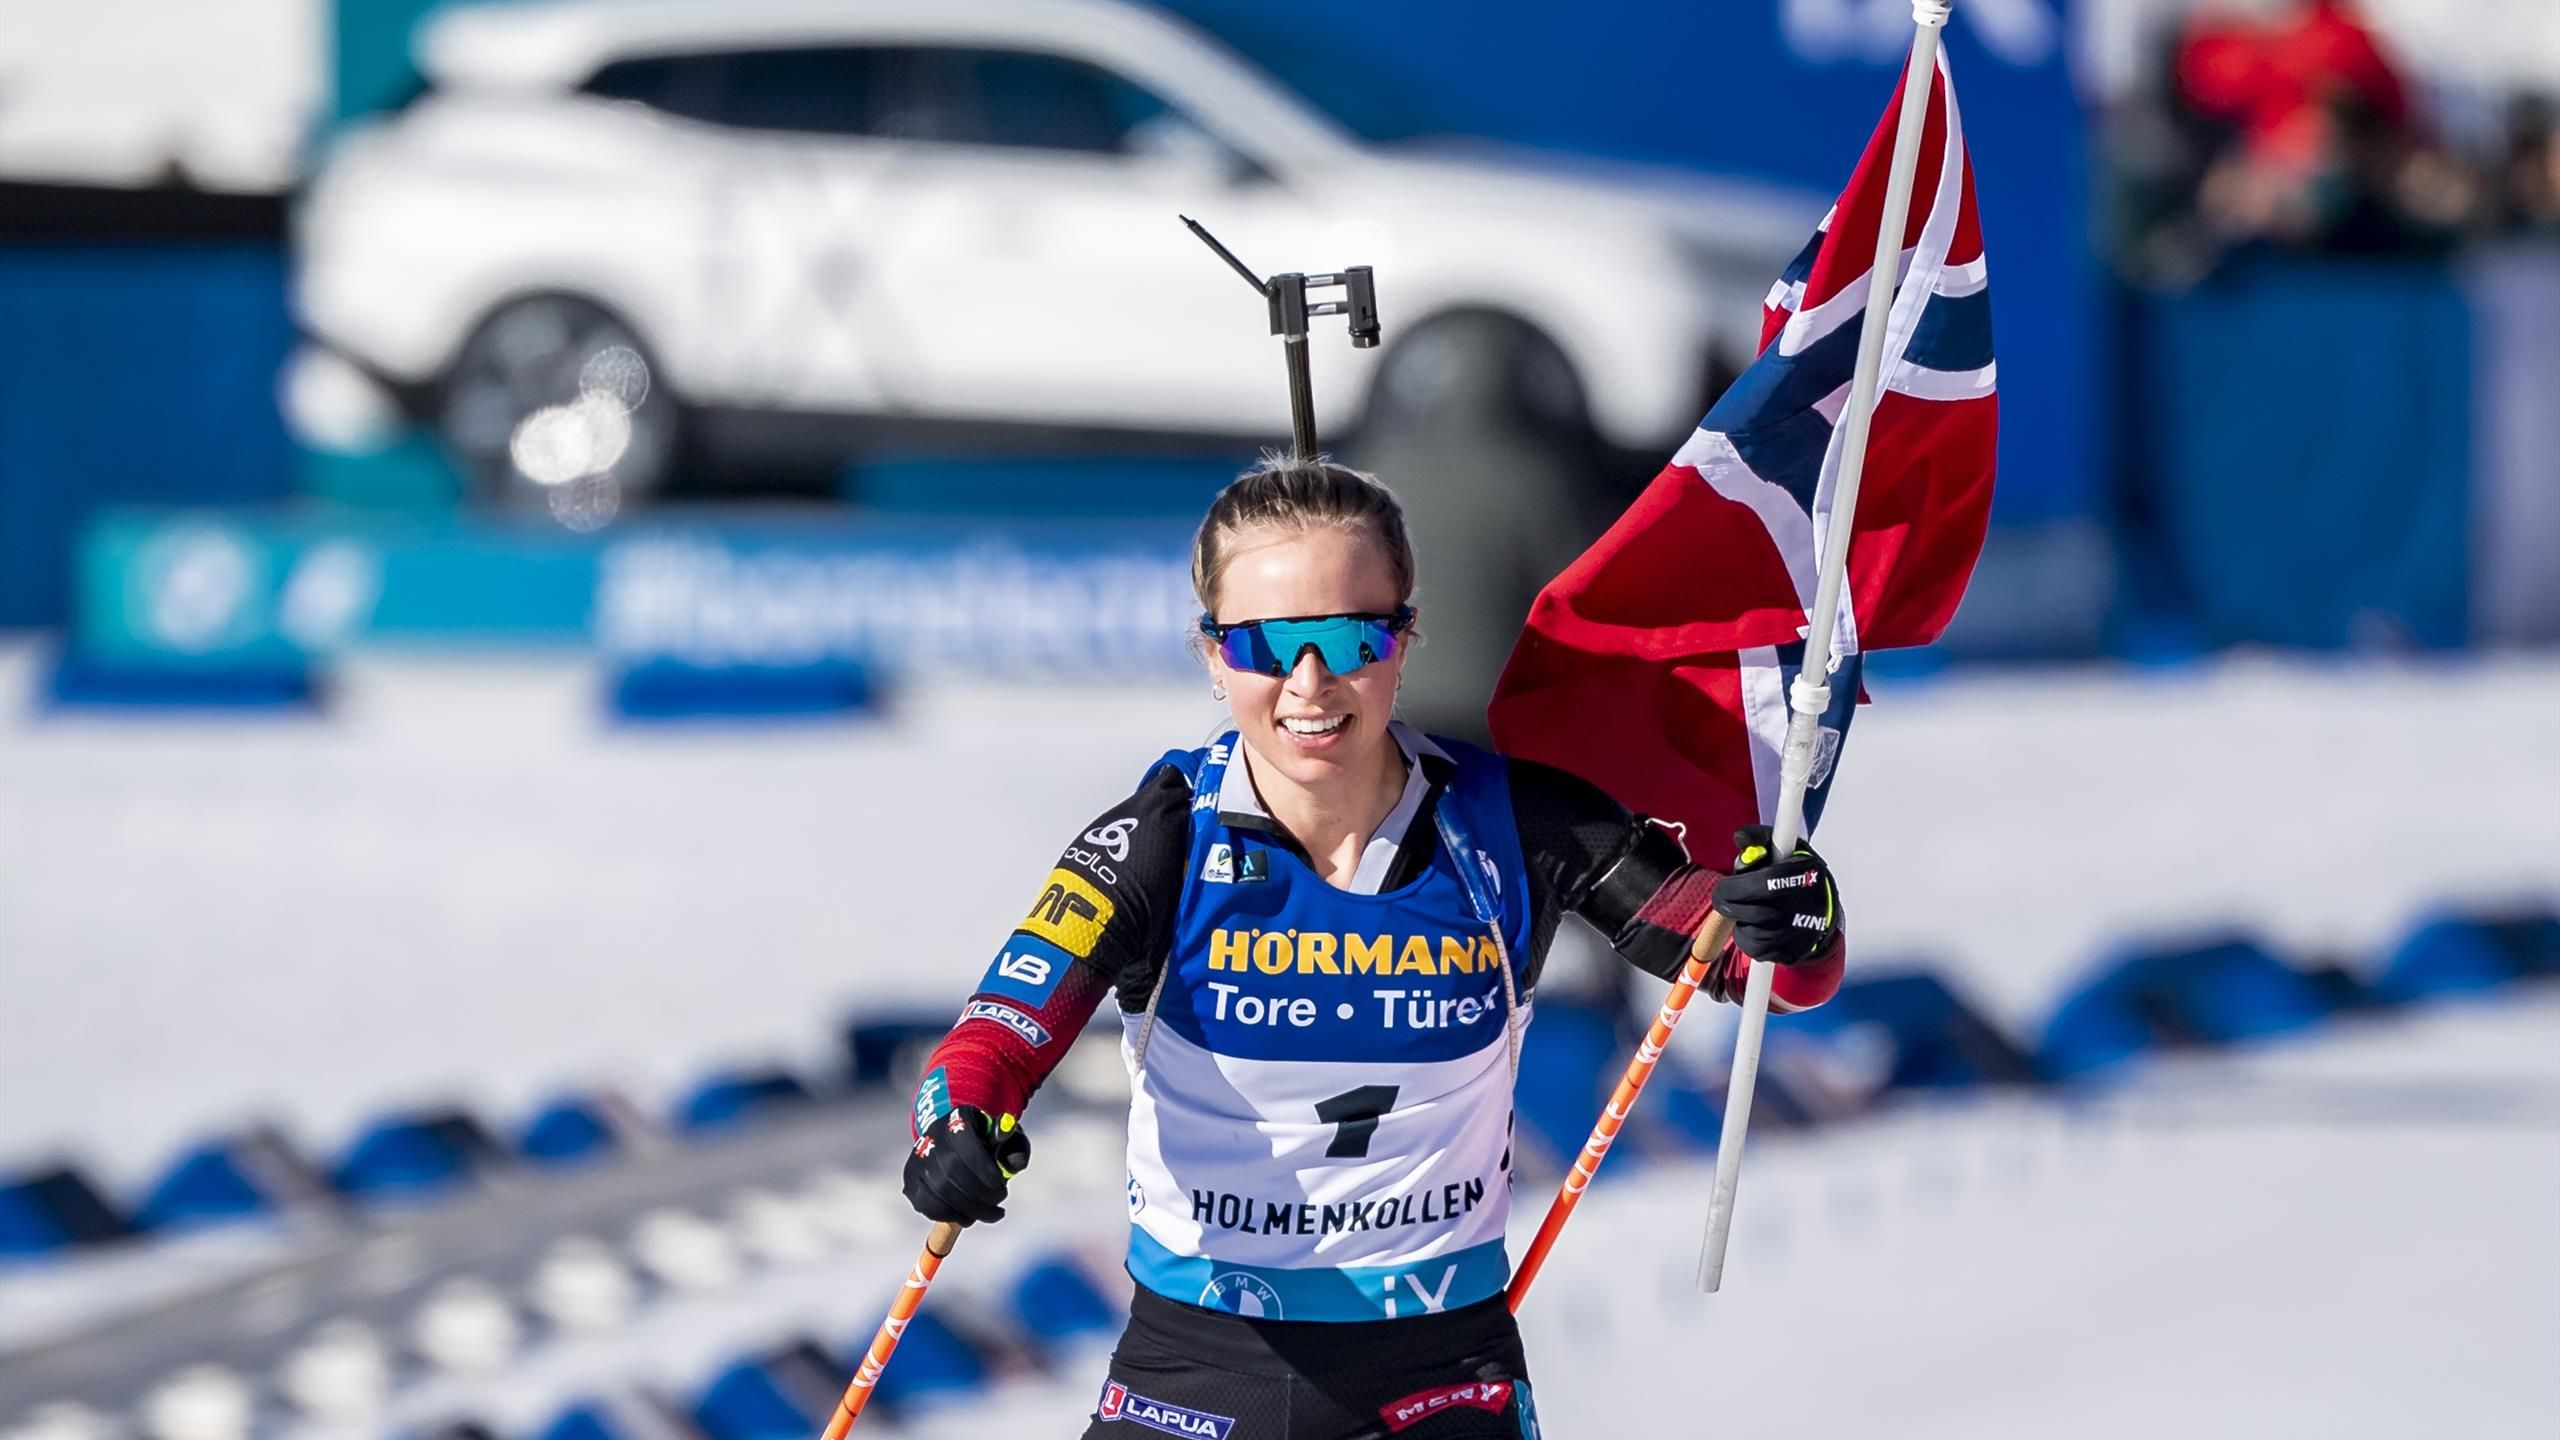 Tiril Eckhoff Norwegian biathlon icon set to retire - I feel incredibly lucky to have lived the dream